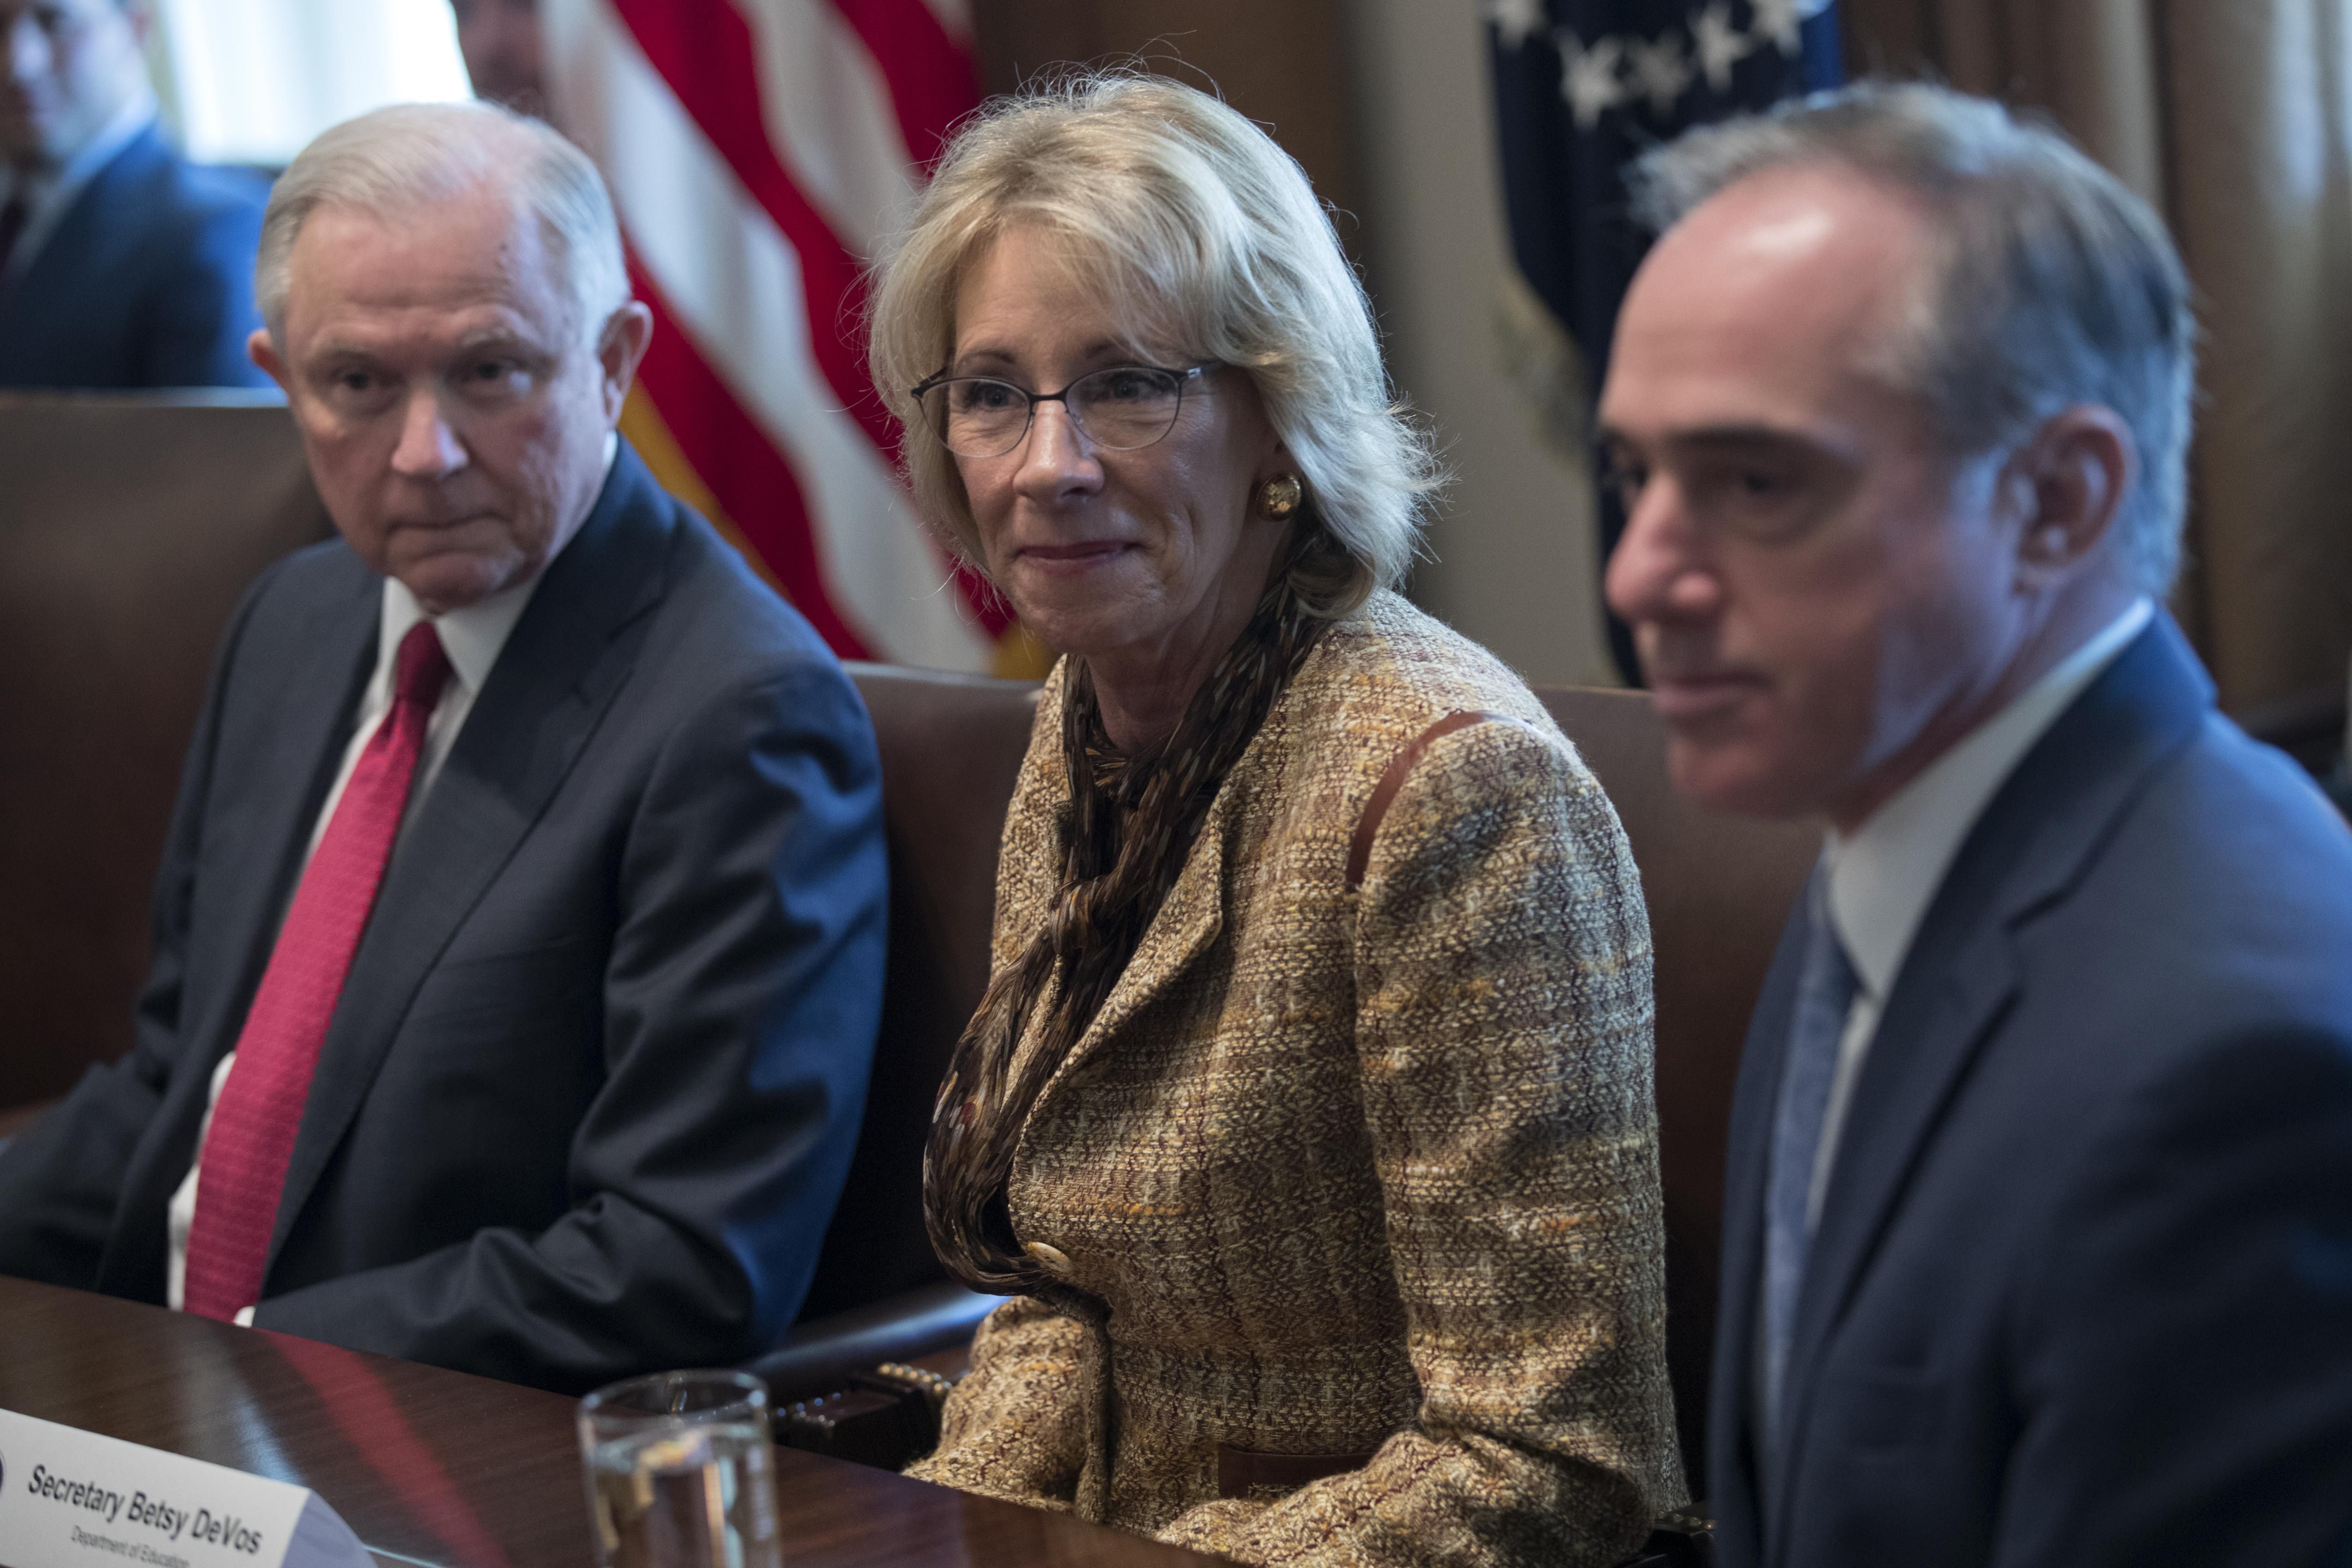 Attorney General Jeff Sessions and Education Secretary Betsy DeVos are among the Cabinet members who attend weekly Bible studies.